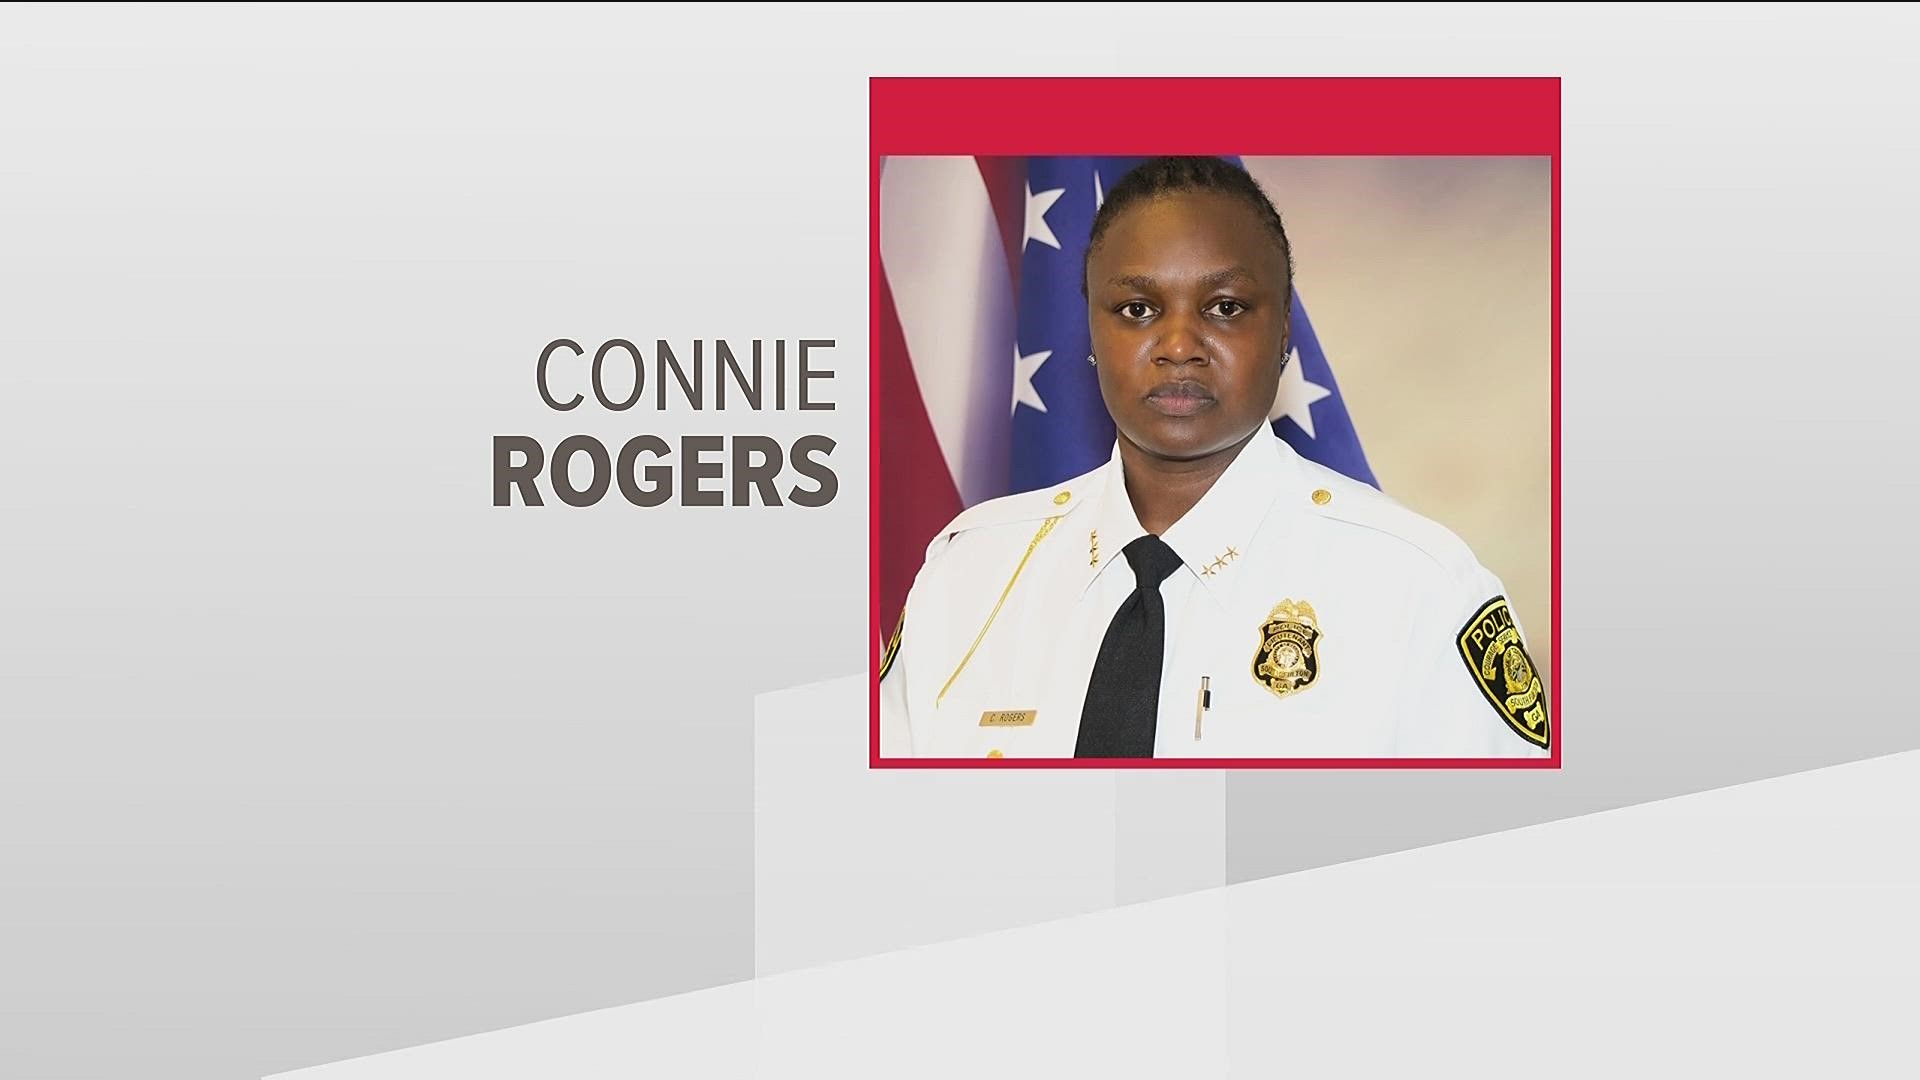 Connie Rogers made history Tuesday – becoming the first Black woman appointed Chief of Police in College Park.